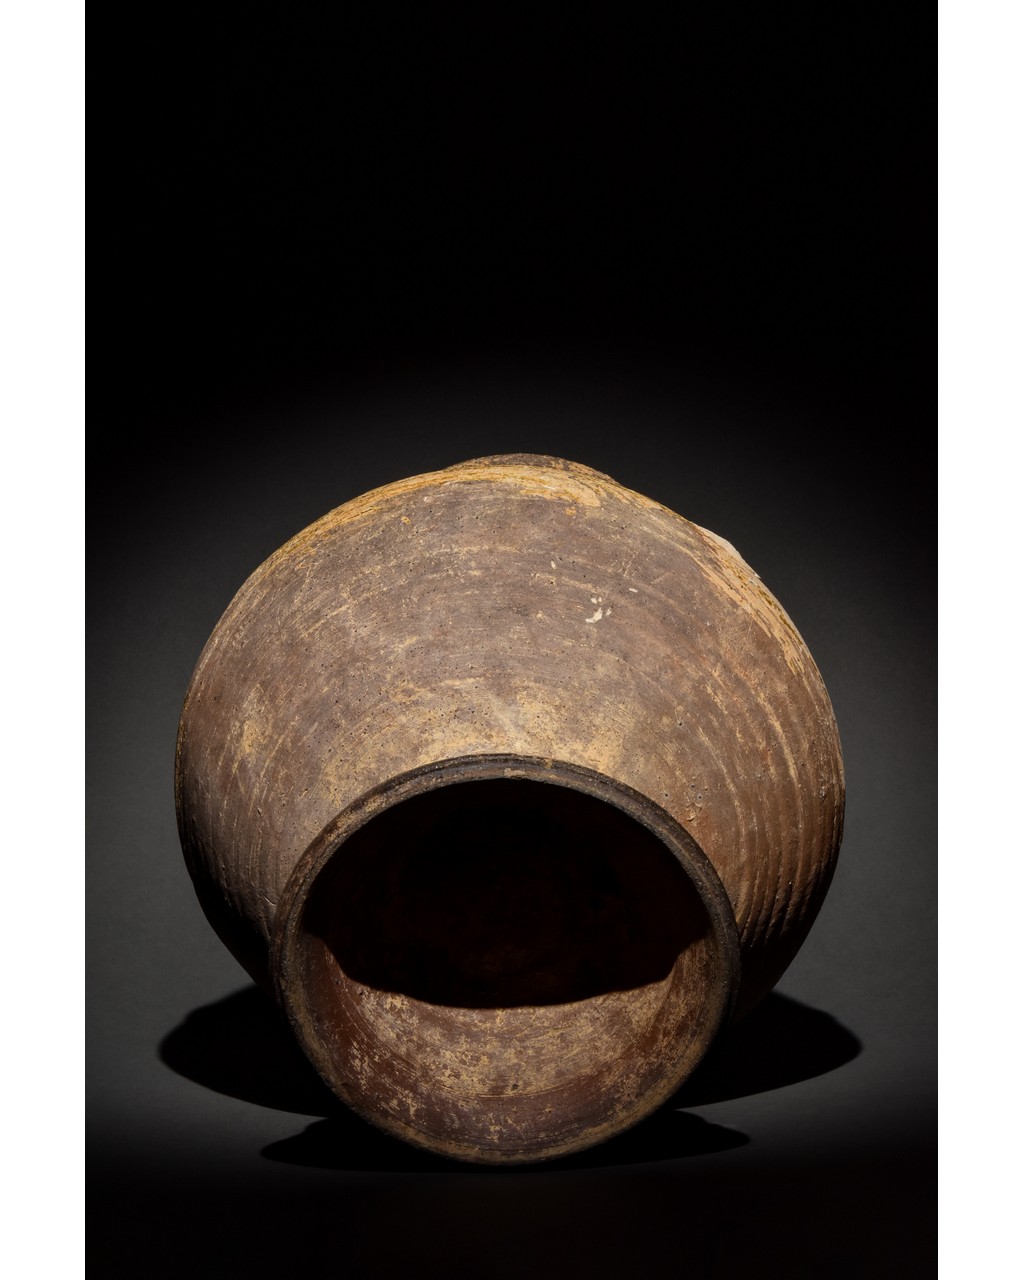 CHINESE HAN DYNASTY TERRACOTTA VESSEL - Image 7 of 12